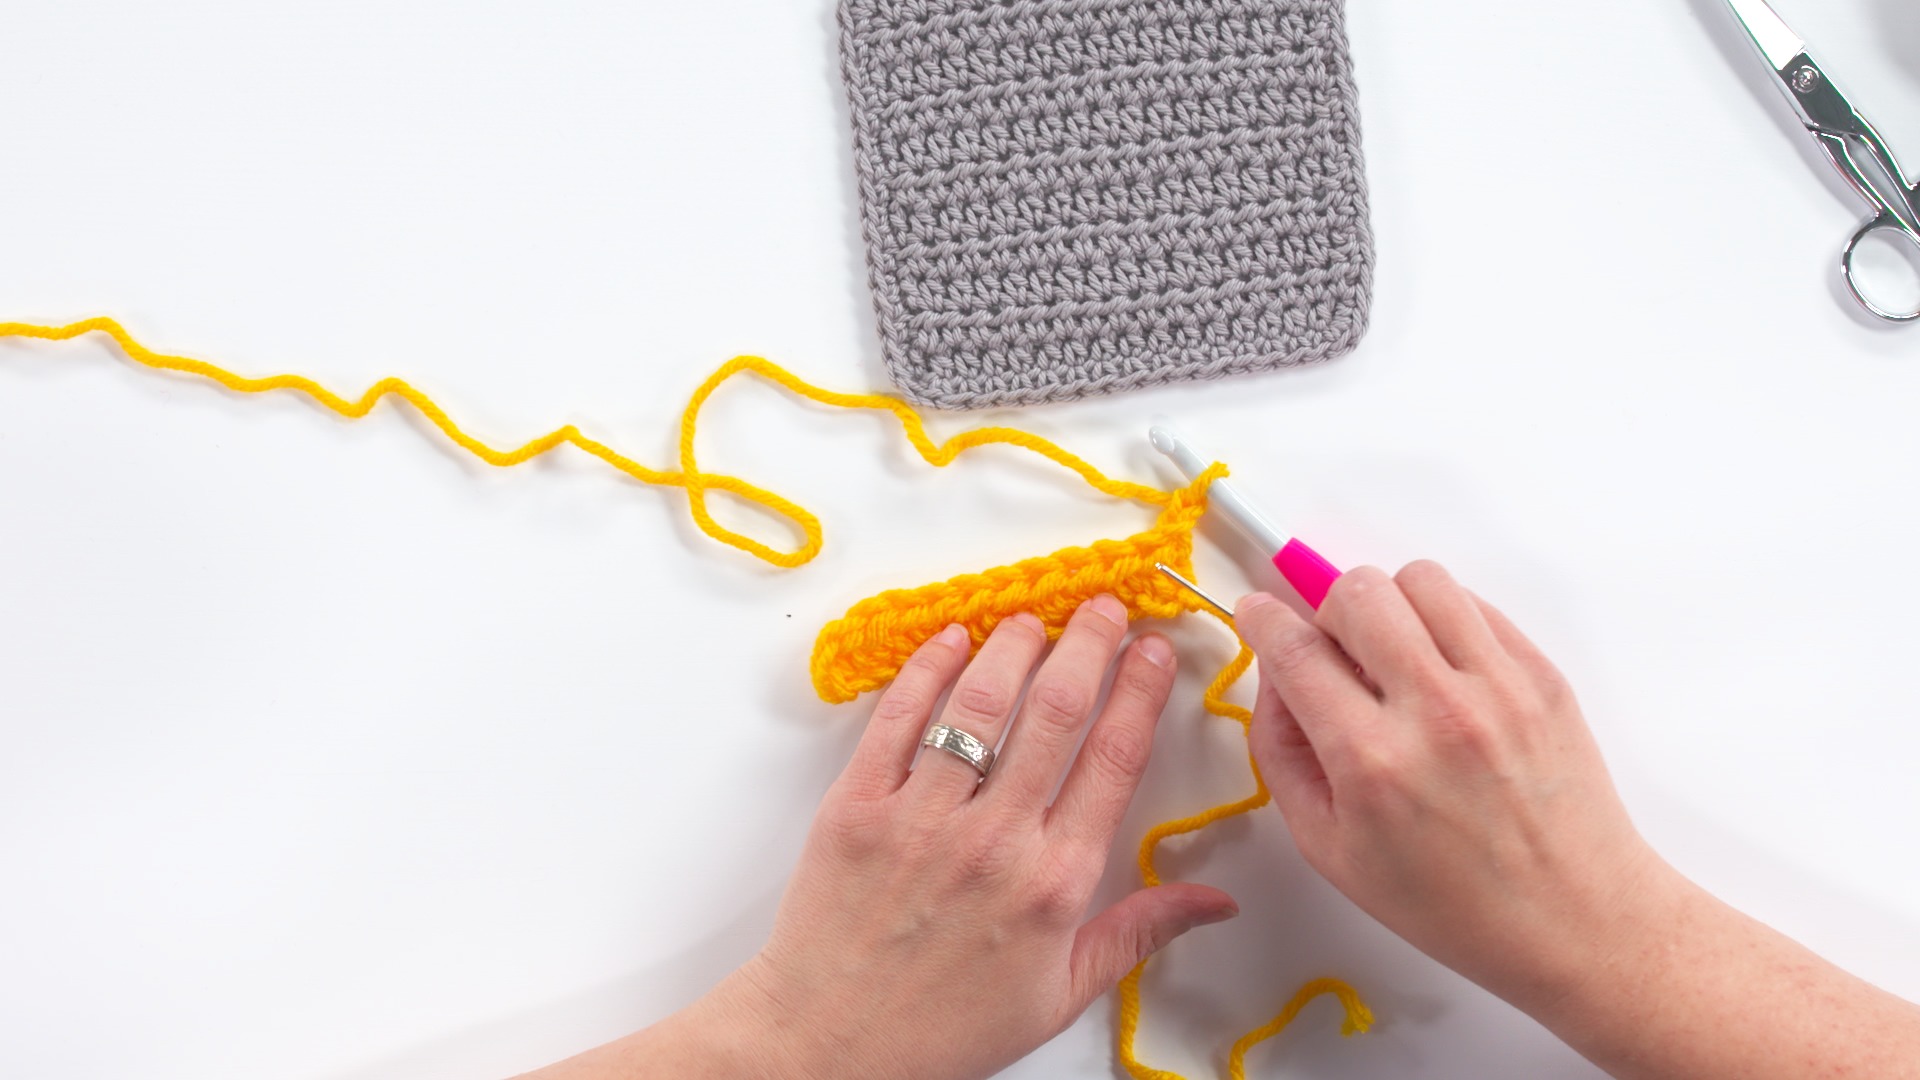 14-Day Learn to Crochet Series: Day 7